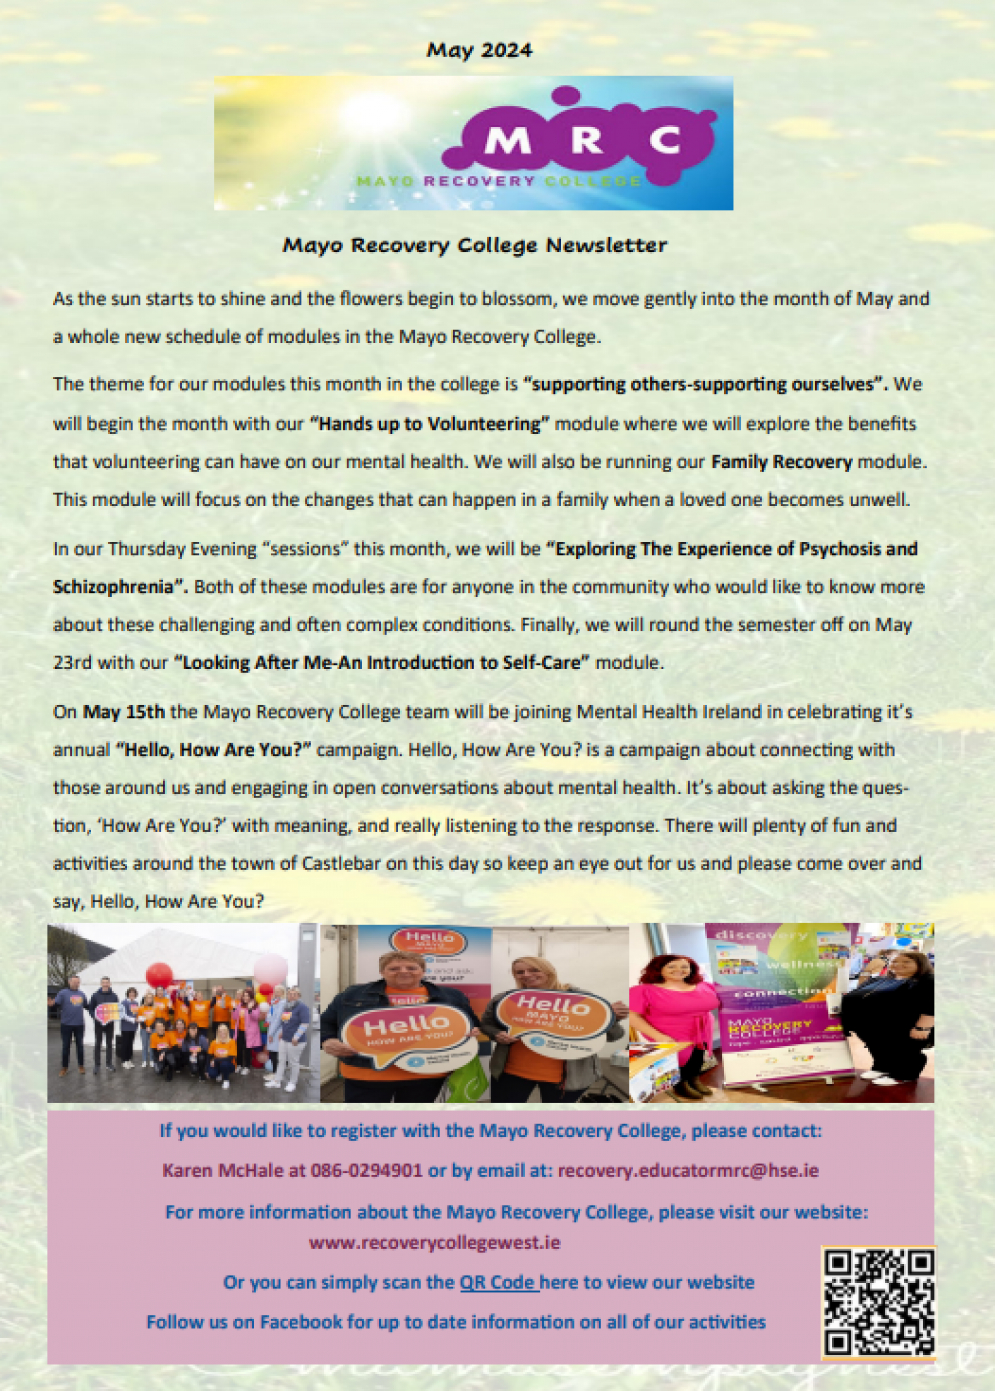 Mayo Recovery College Newsletter-May 2024